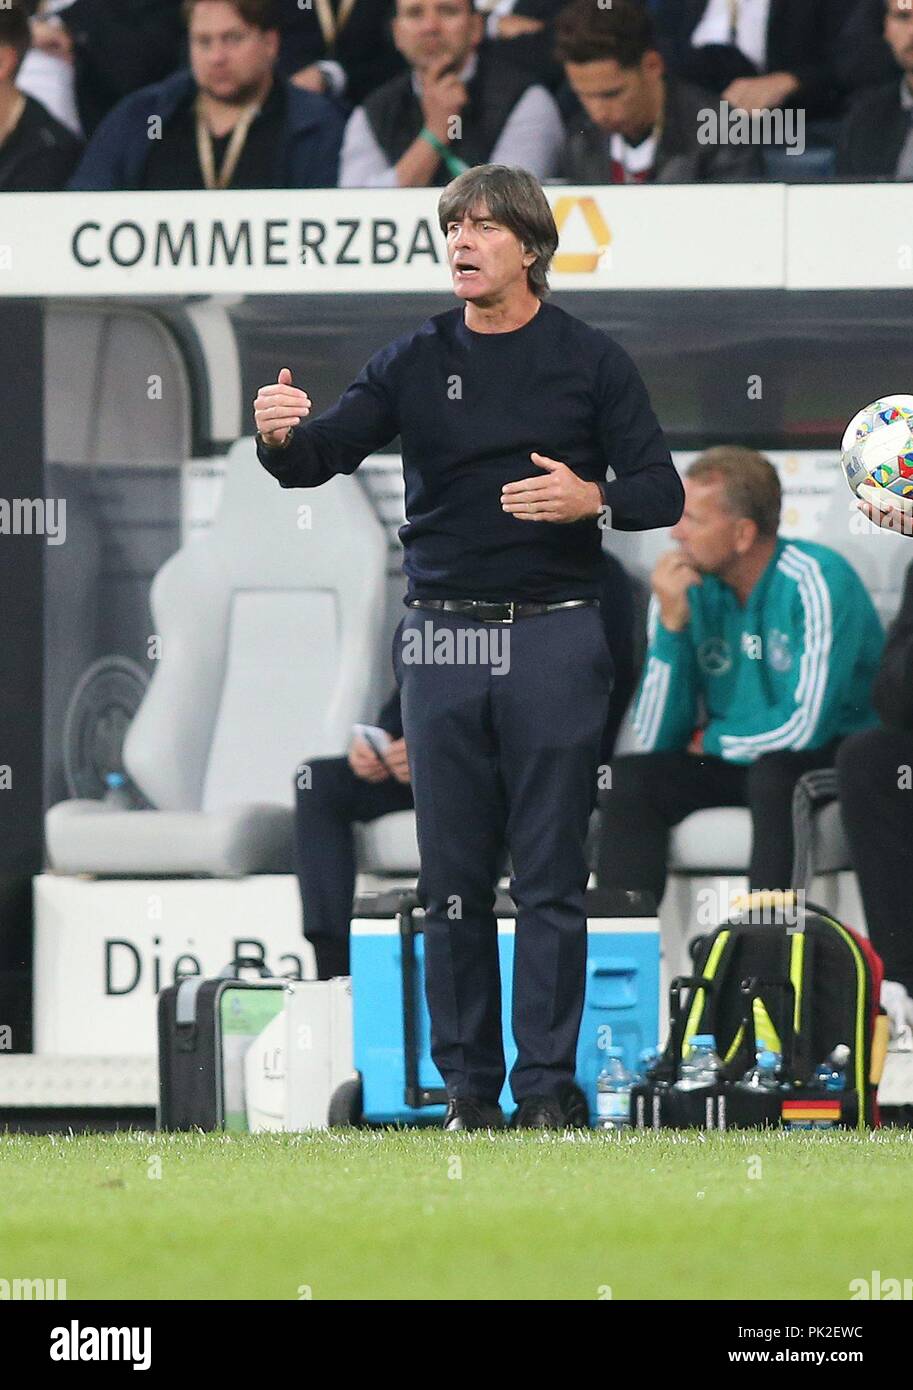 firo: 09.09.2018 Football, Soccer, National Team, Germany, Friendly Match, GER, Germany - Peru, 2: 1, Joachim Low, LOEW, coach, DFB, Germany, full figure, gesture, facial expressions, | usage worldwide Stock Photo